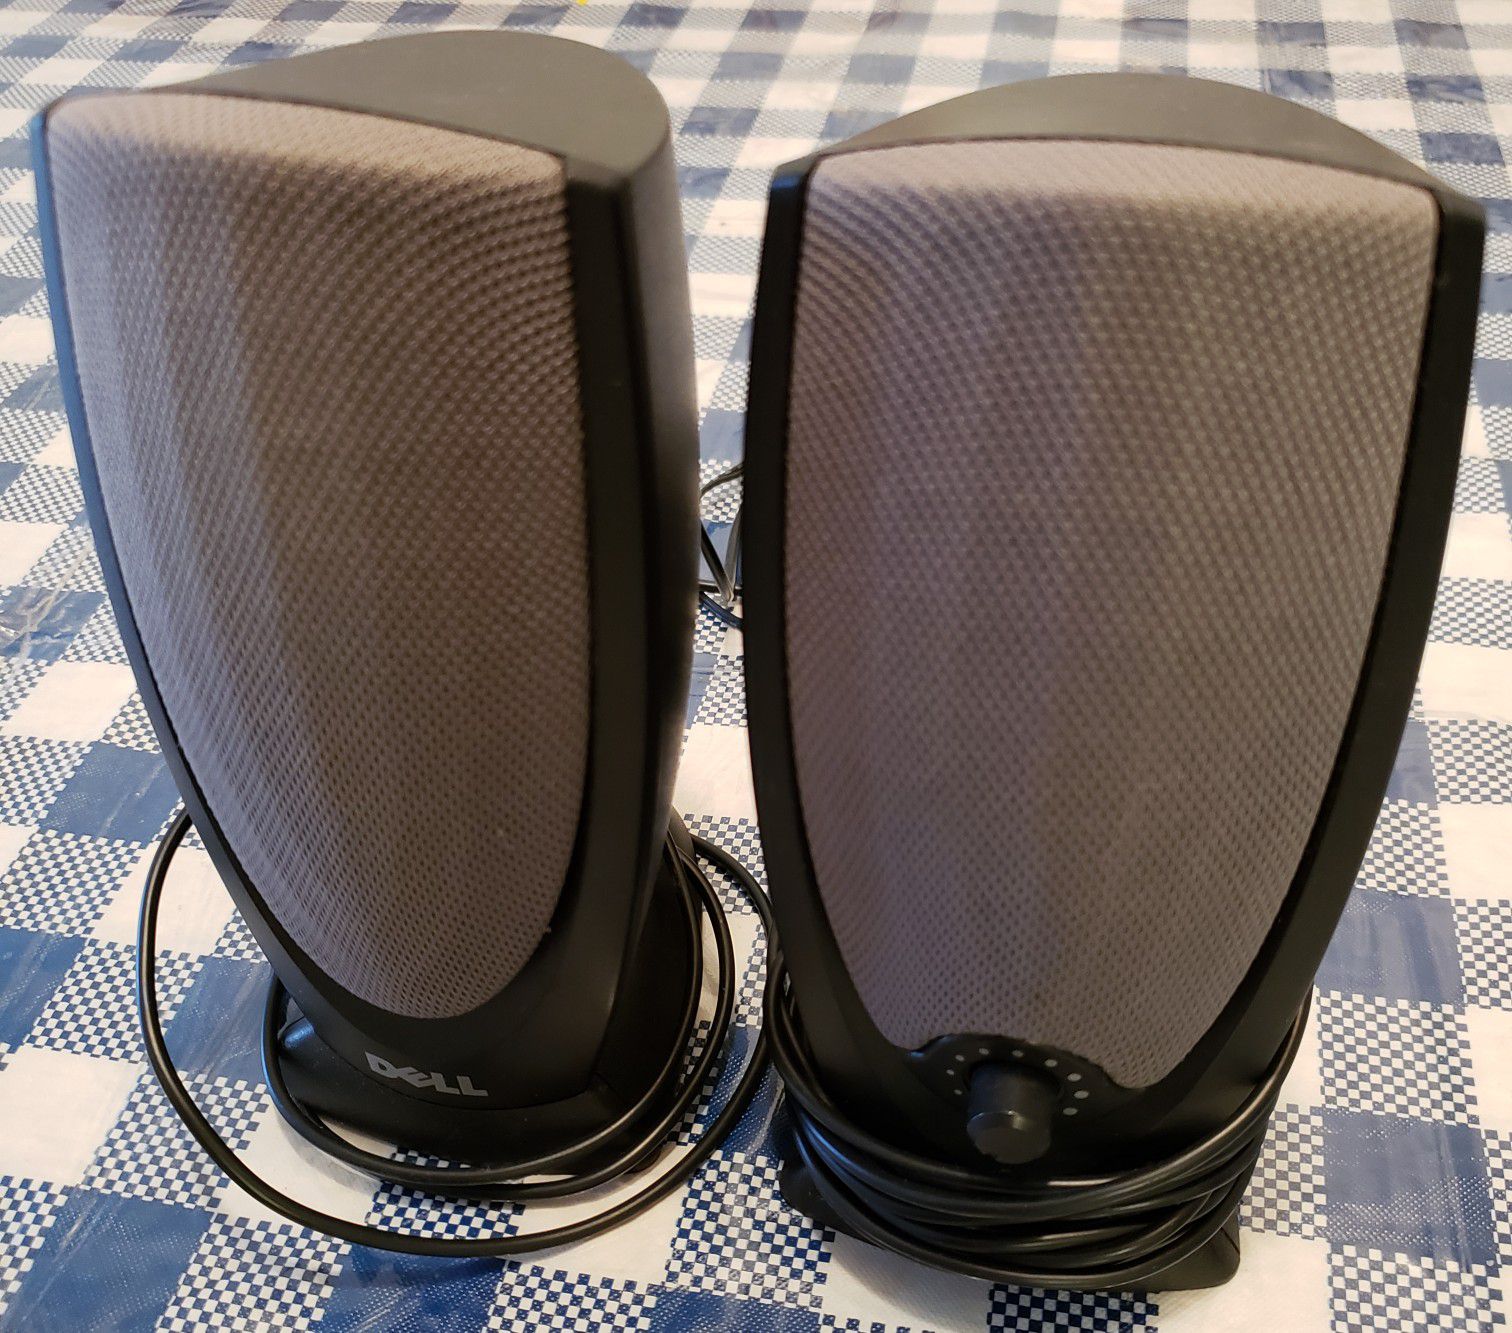 Dell Computer Speakers